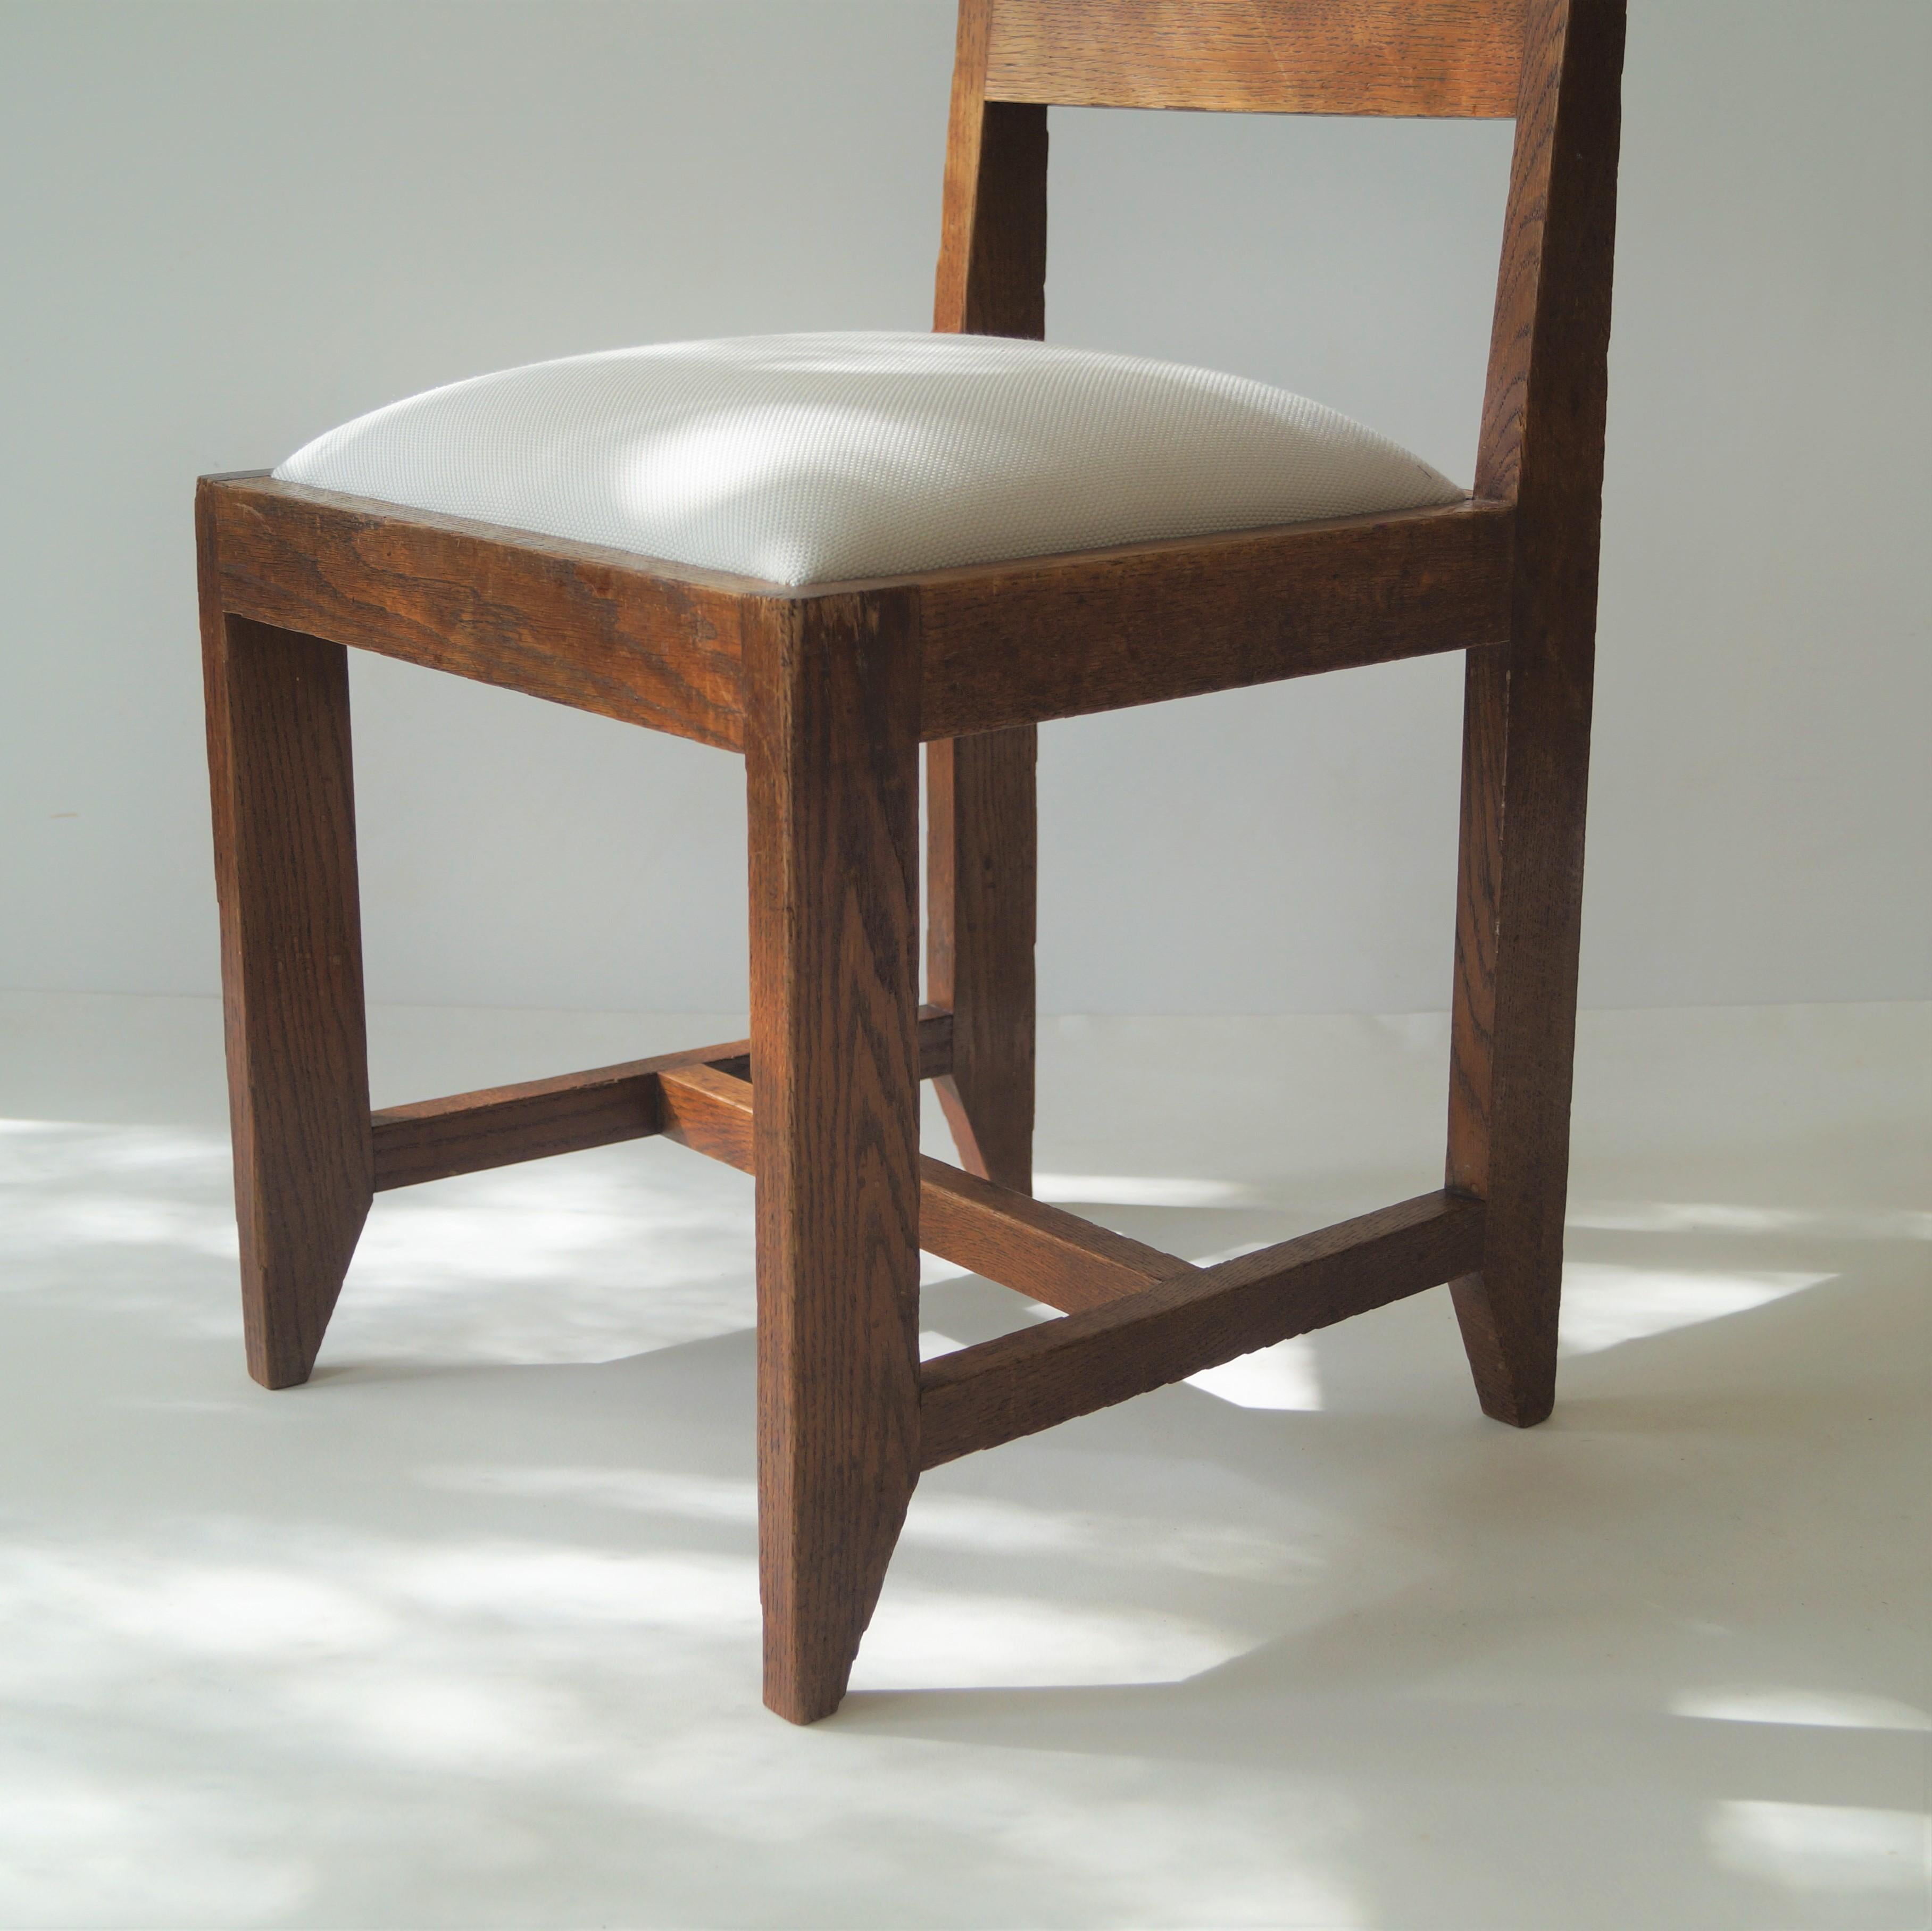 Early 20th Century Dutch Art Deco Haagse School side chair by Henrik Wouda for Pander, 1920s